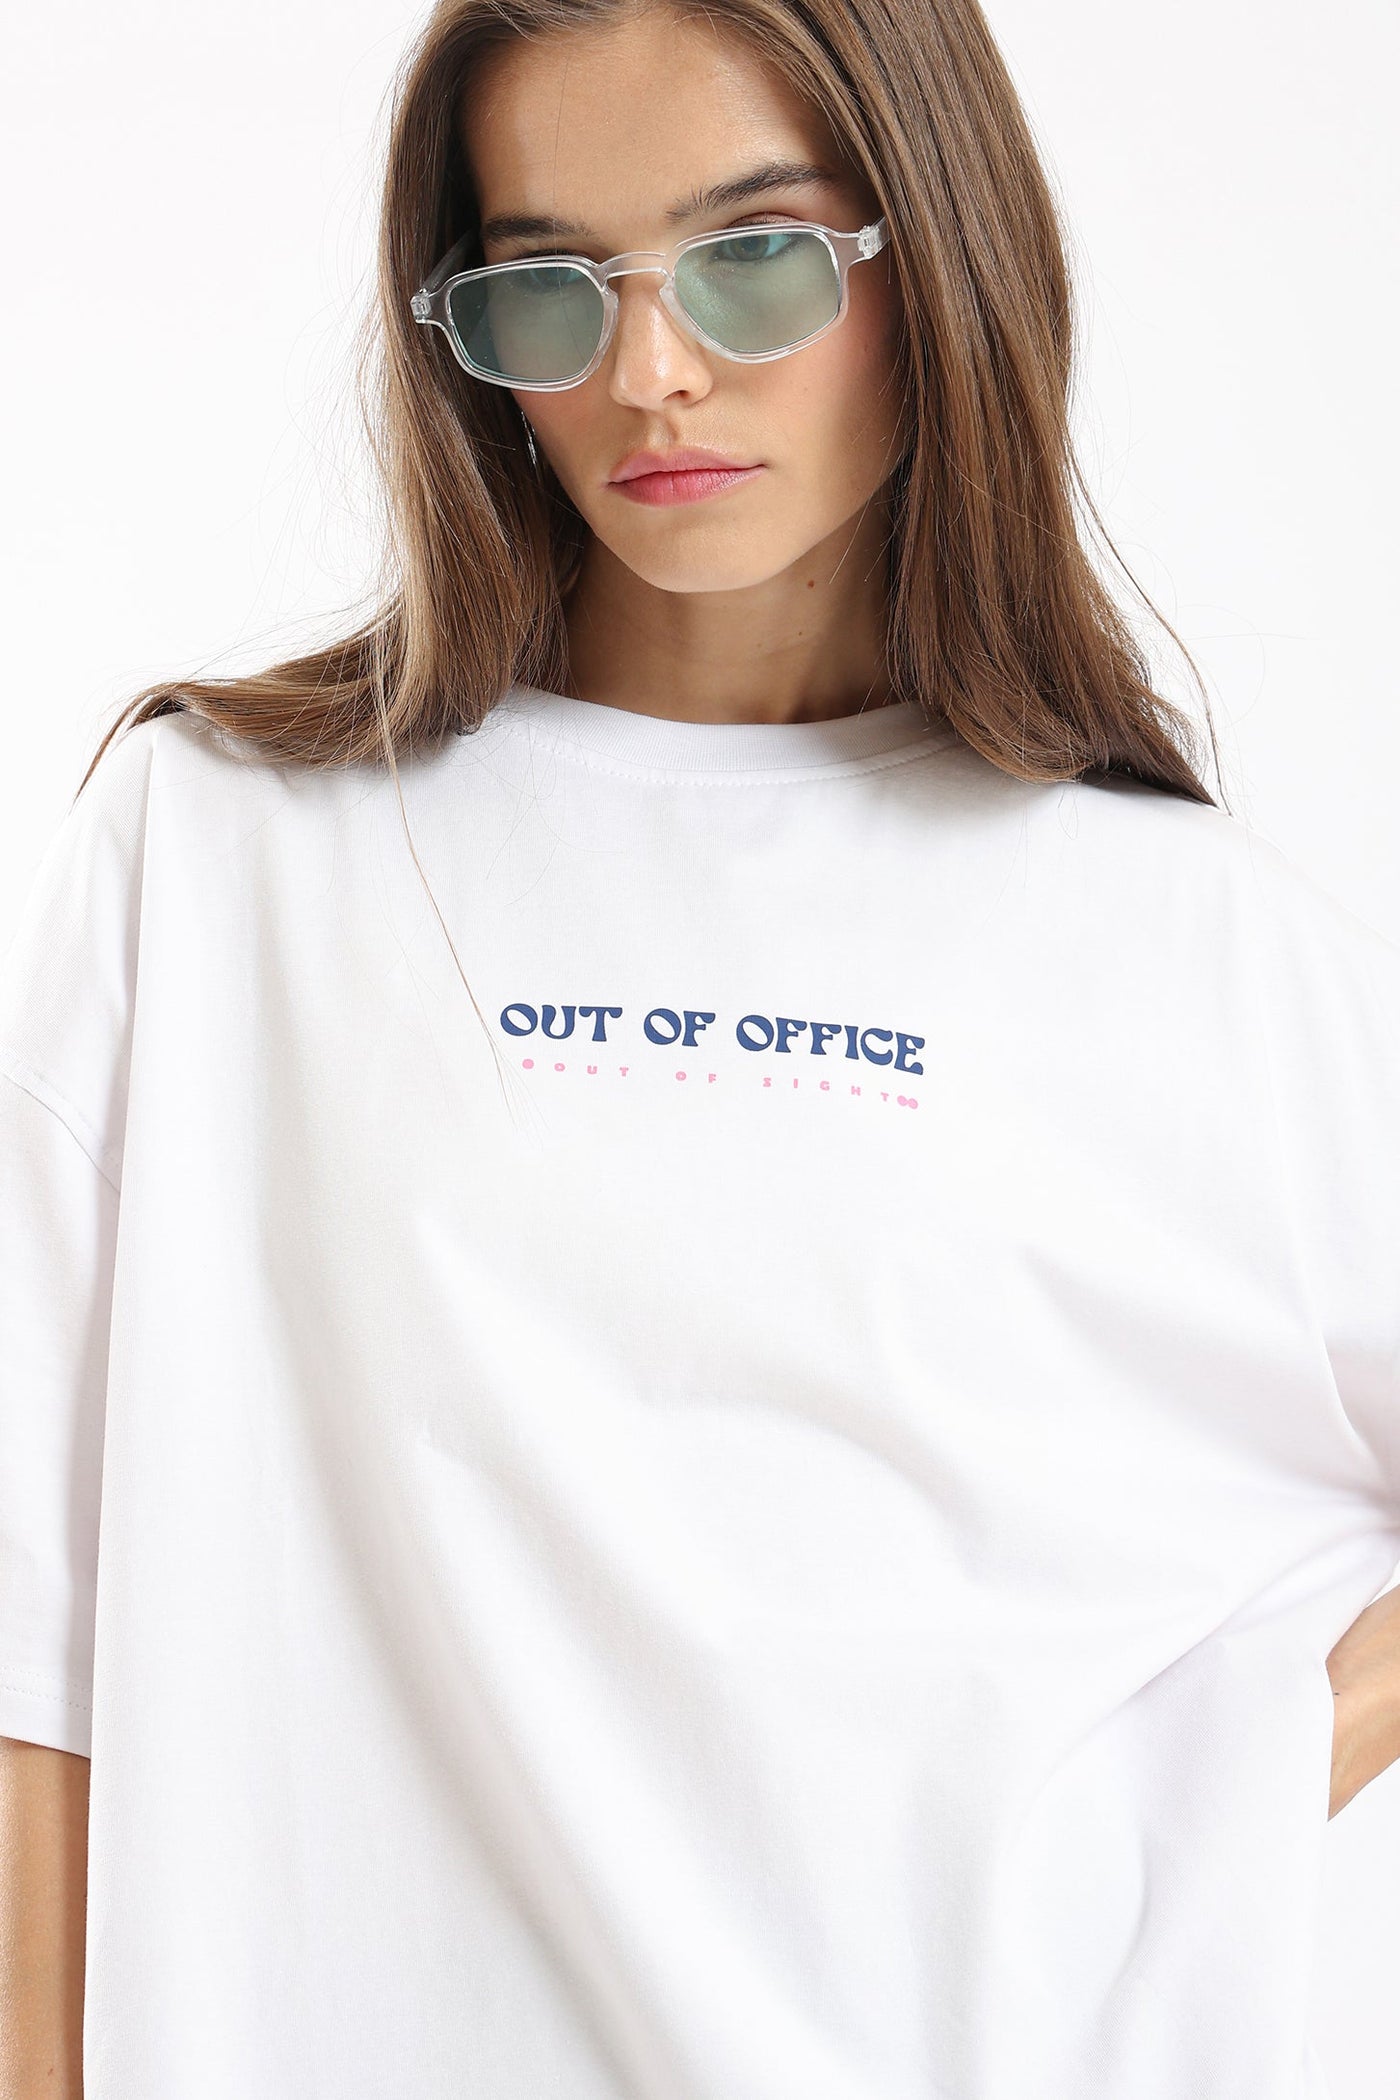 Unisex T-Shirt - Oversized - "Out Of Office" Back Print